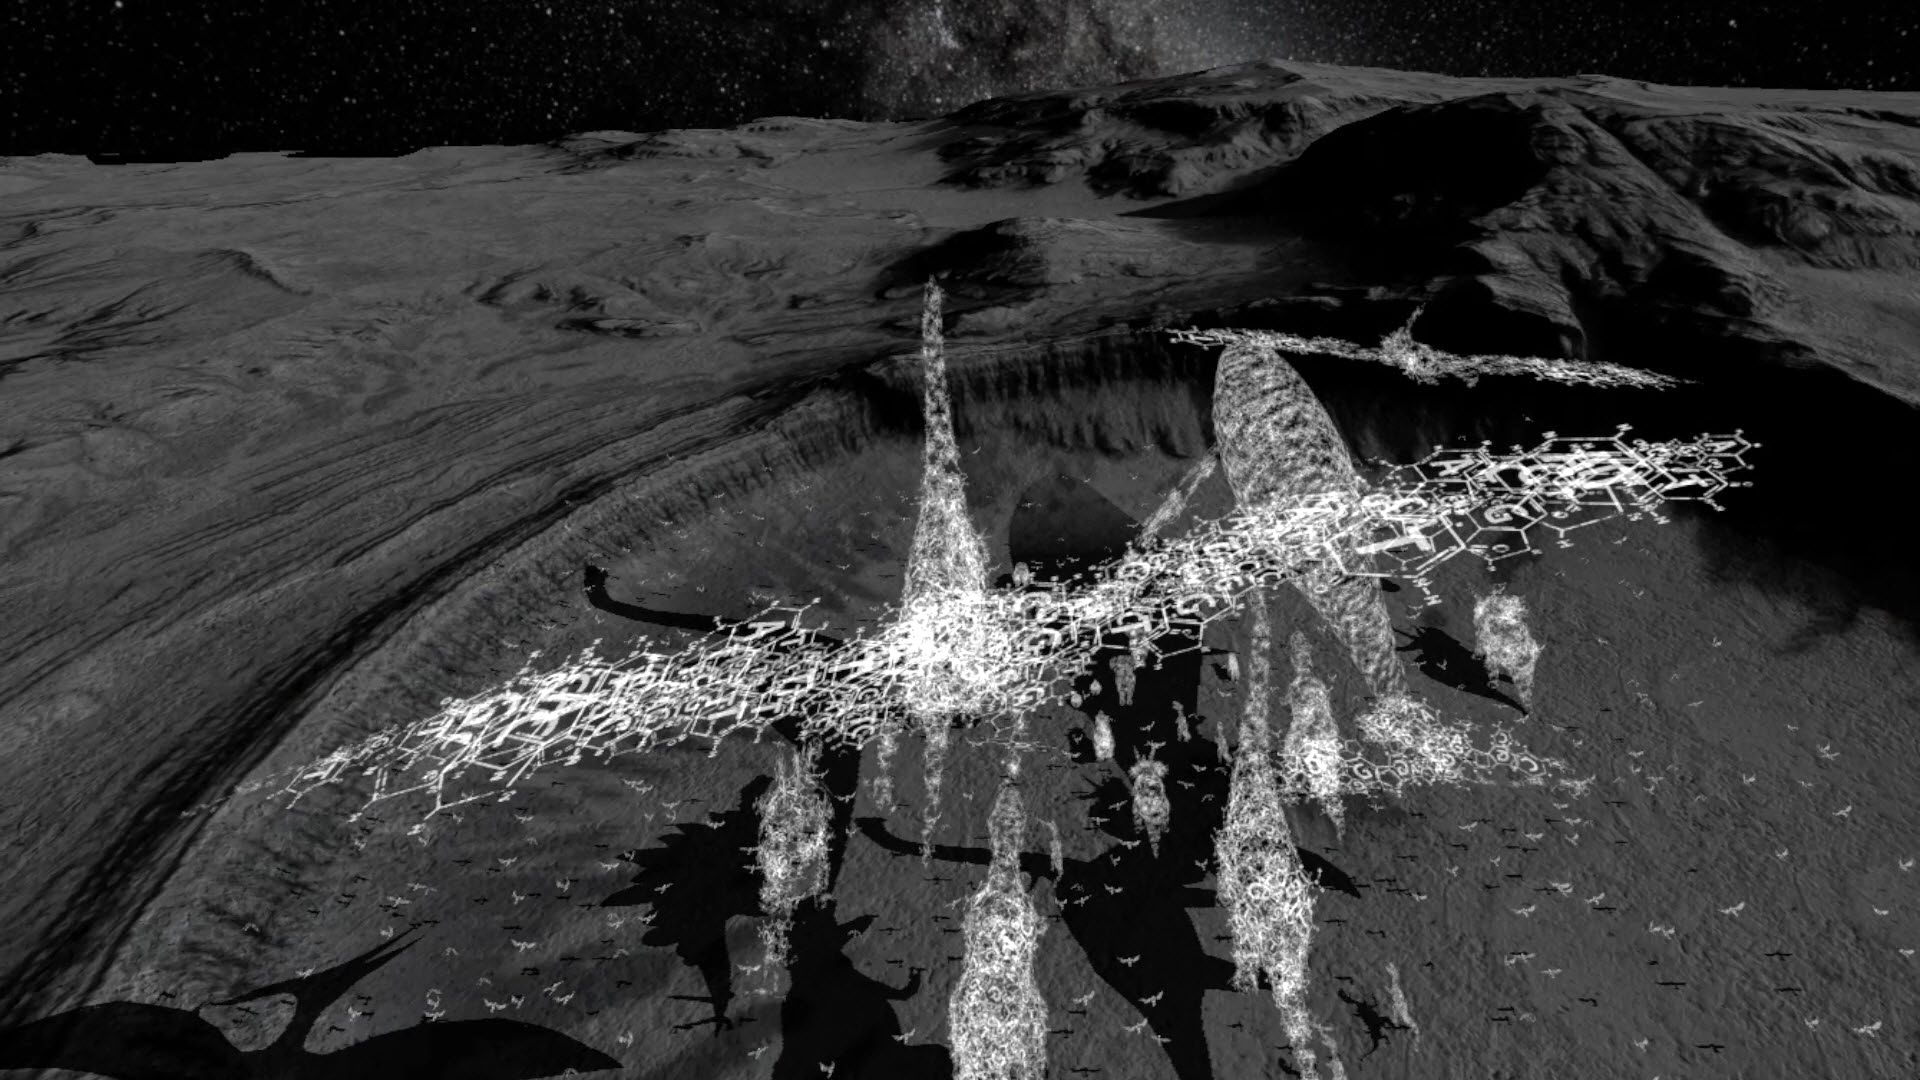 A still from Laurie Anderson and Hsin-Chien Huang's To the Moon (2018) Courtesy Laurie Anderson/Hsin-Chien Huang